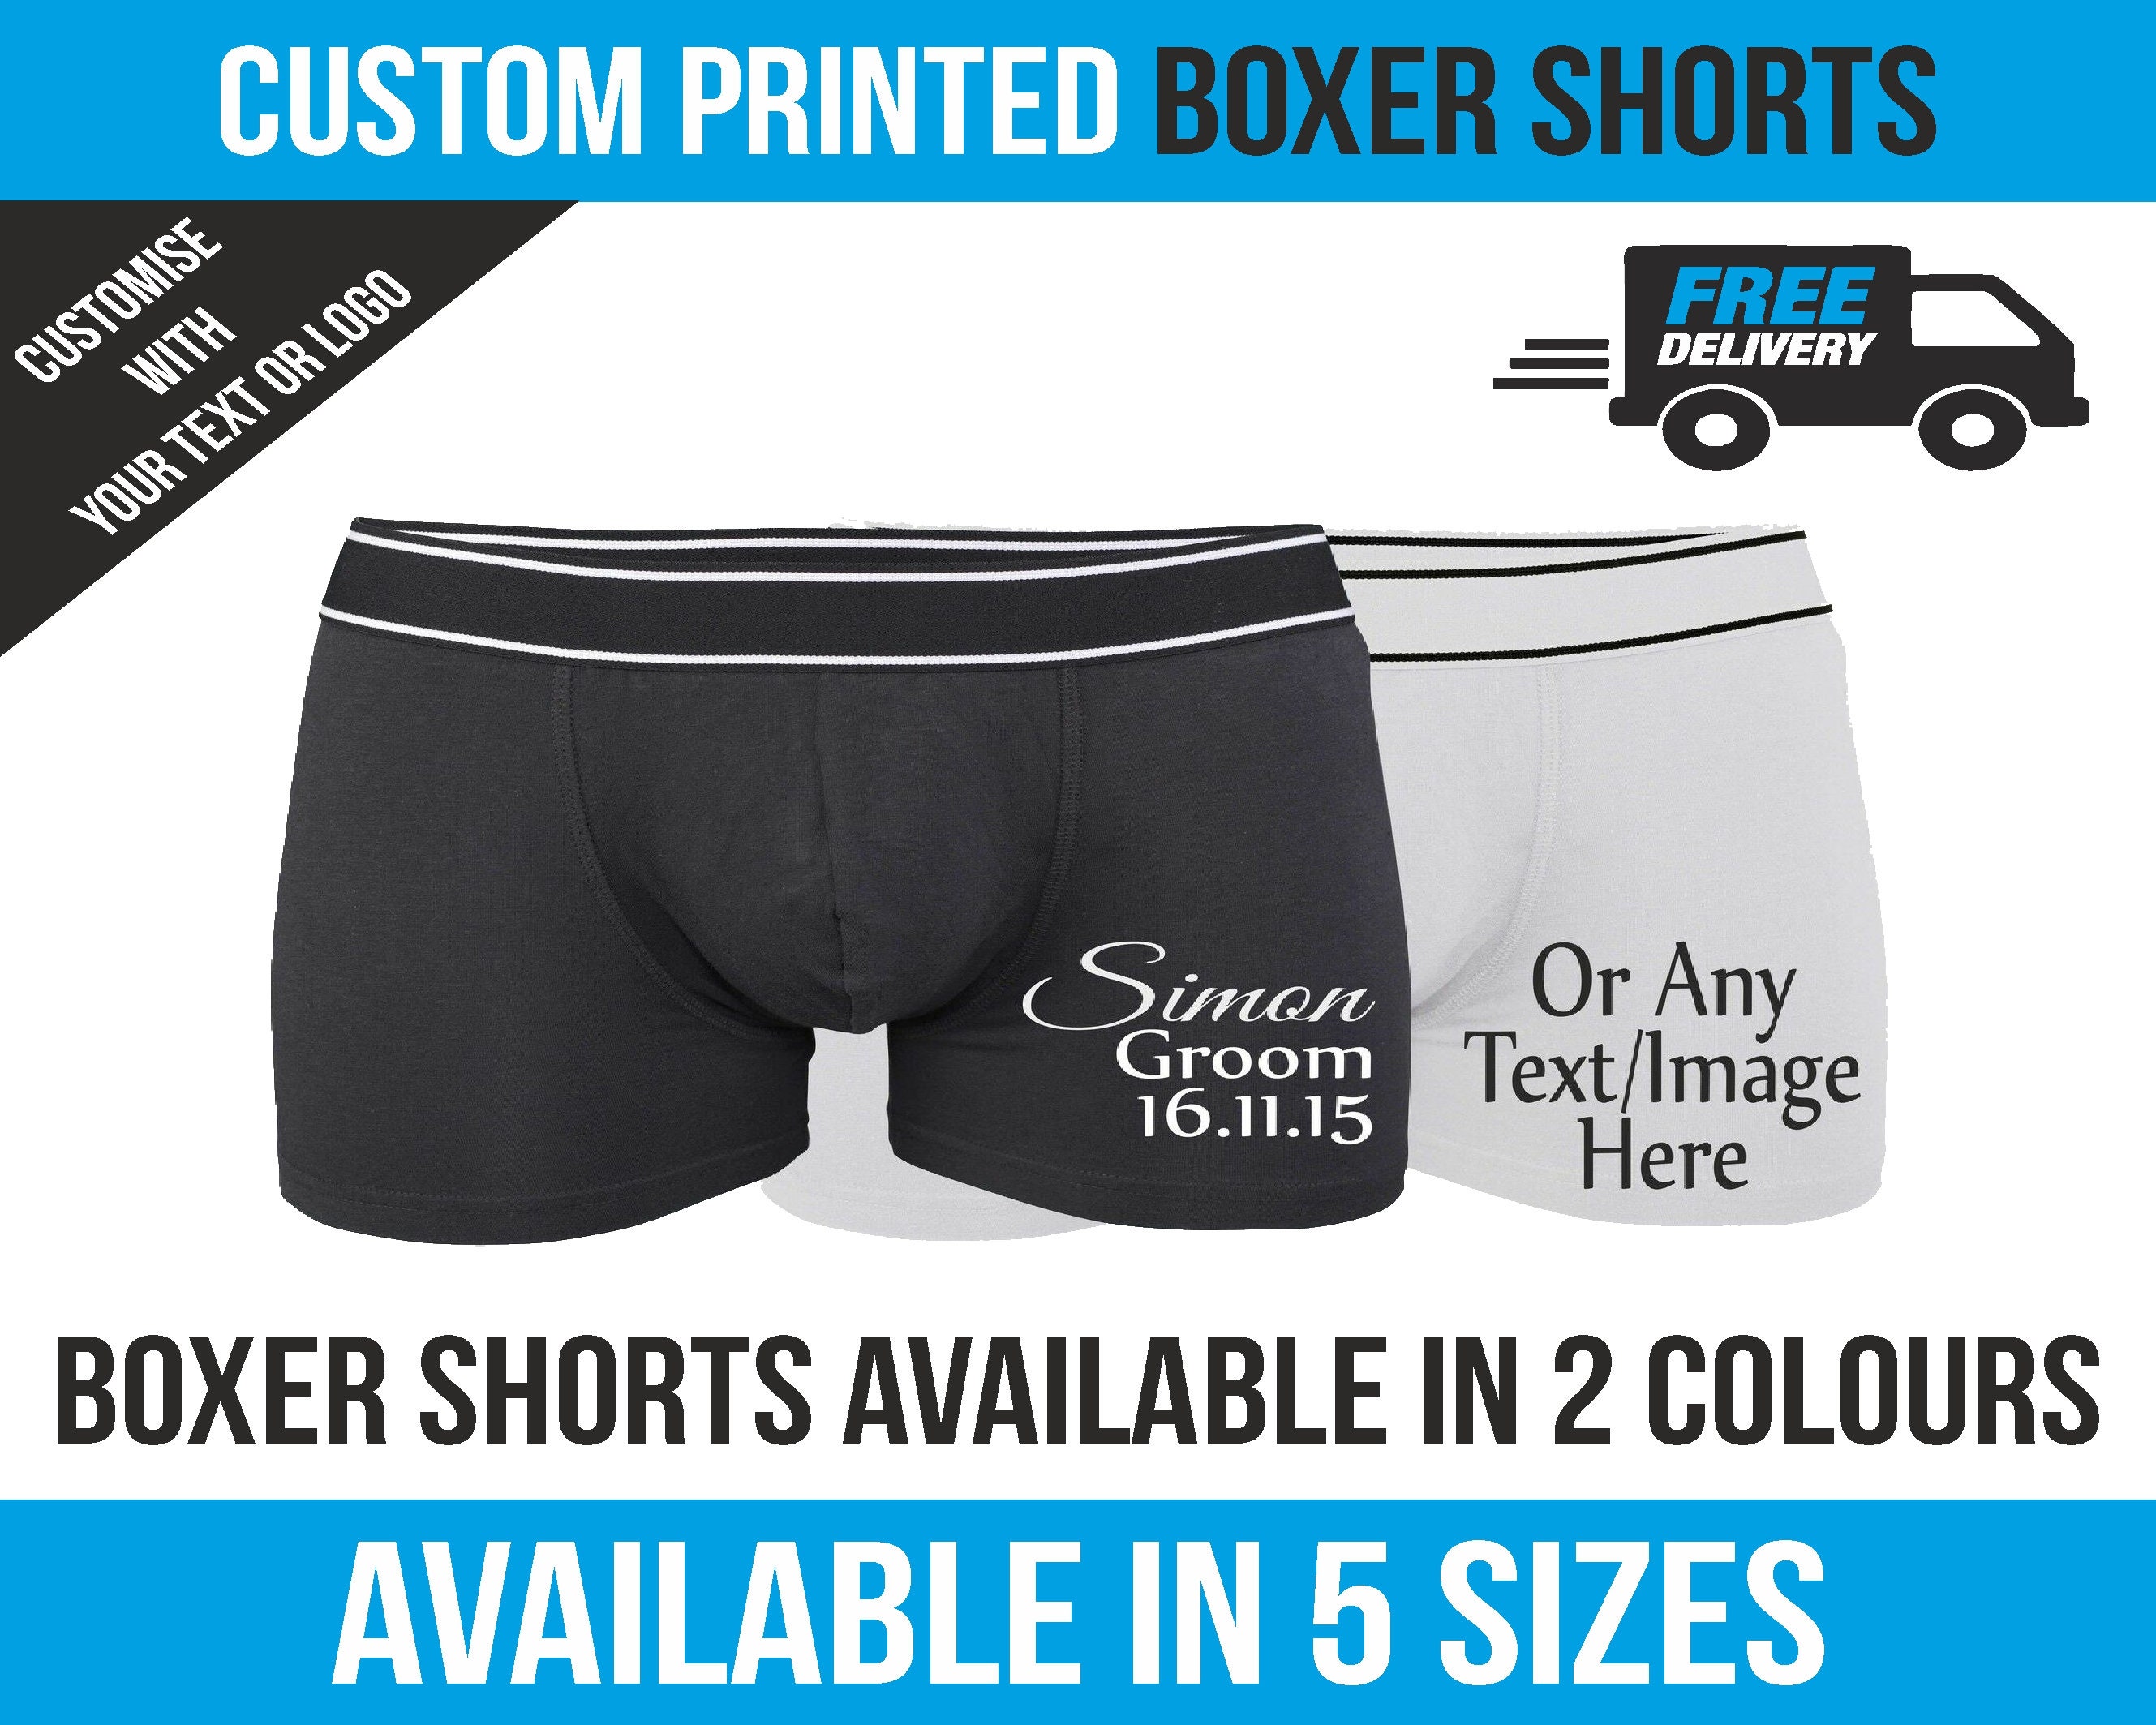 Personalised Boxer Shorts, Mens Personalized Boxers Briefs, Custom Printed  Underwear Gift for Groom Wedding Fathers Day Boyfriend Husband -  Hong  Kong